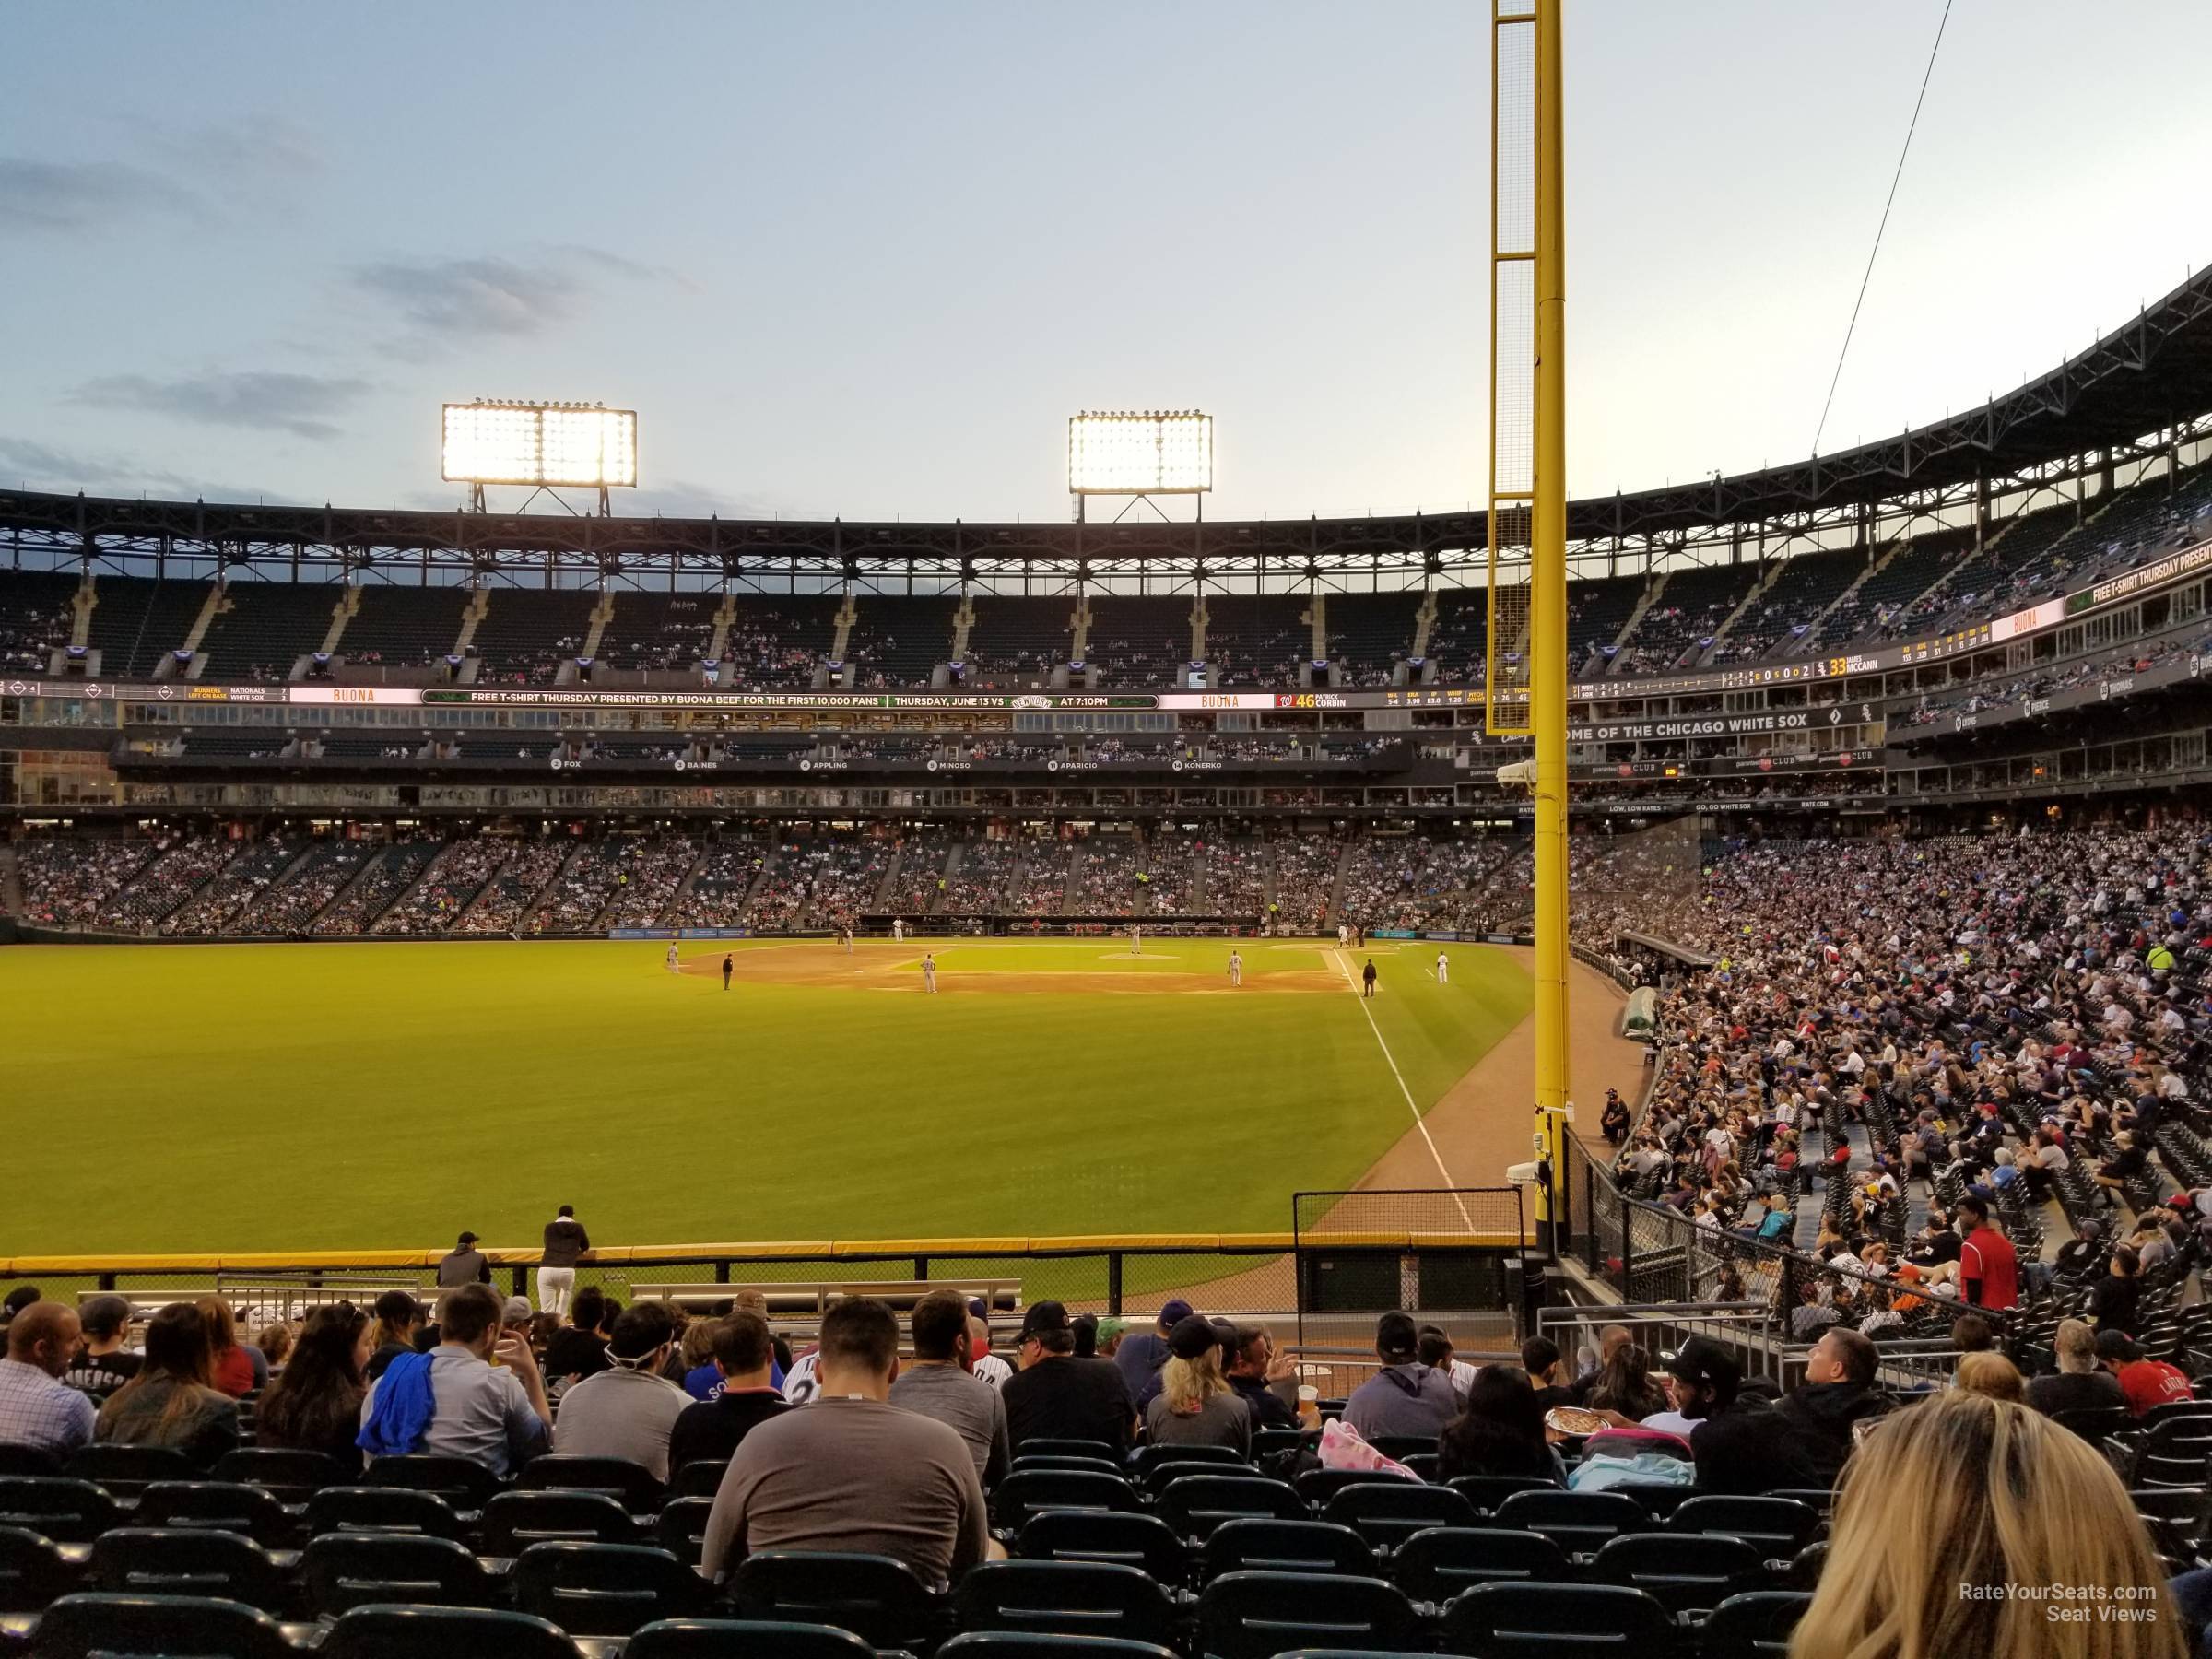 section 157, row 22 seat view  - guaranteed rate field